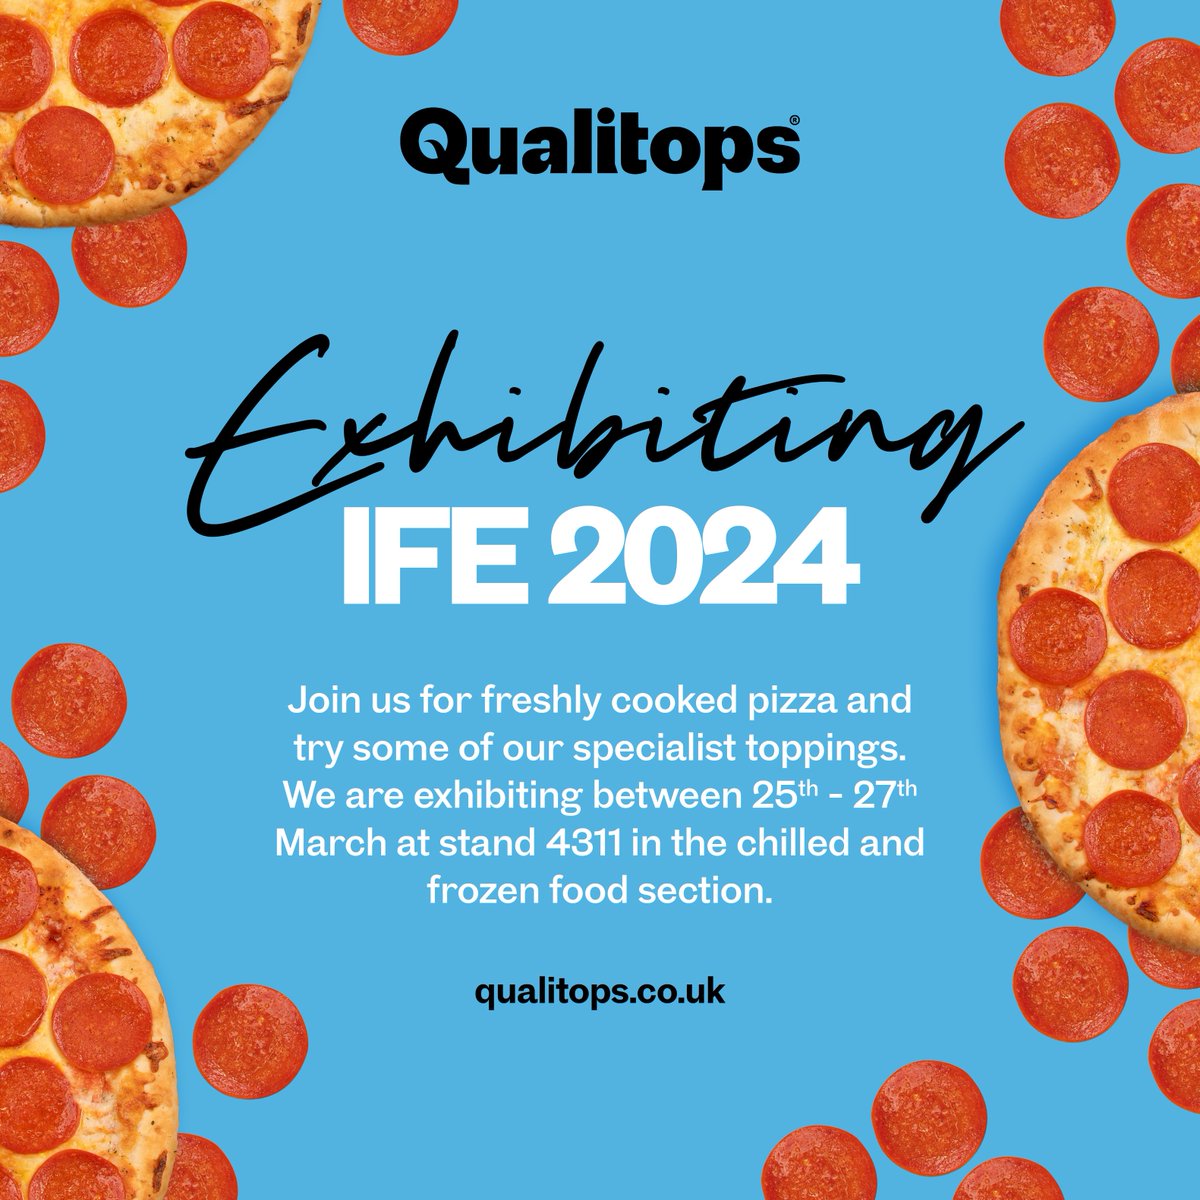 We will be at IFE 2024 on the 25th - 27th March!!🍕

Come along and enjoy some freshly cooked pizza and try some of our delicious toppings! We will be at stand 4311!⭐️

#qualitops #qualitytoppings #ife2024 #ukexhibitions